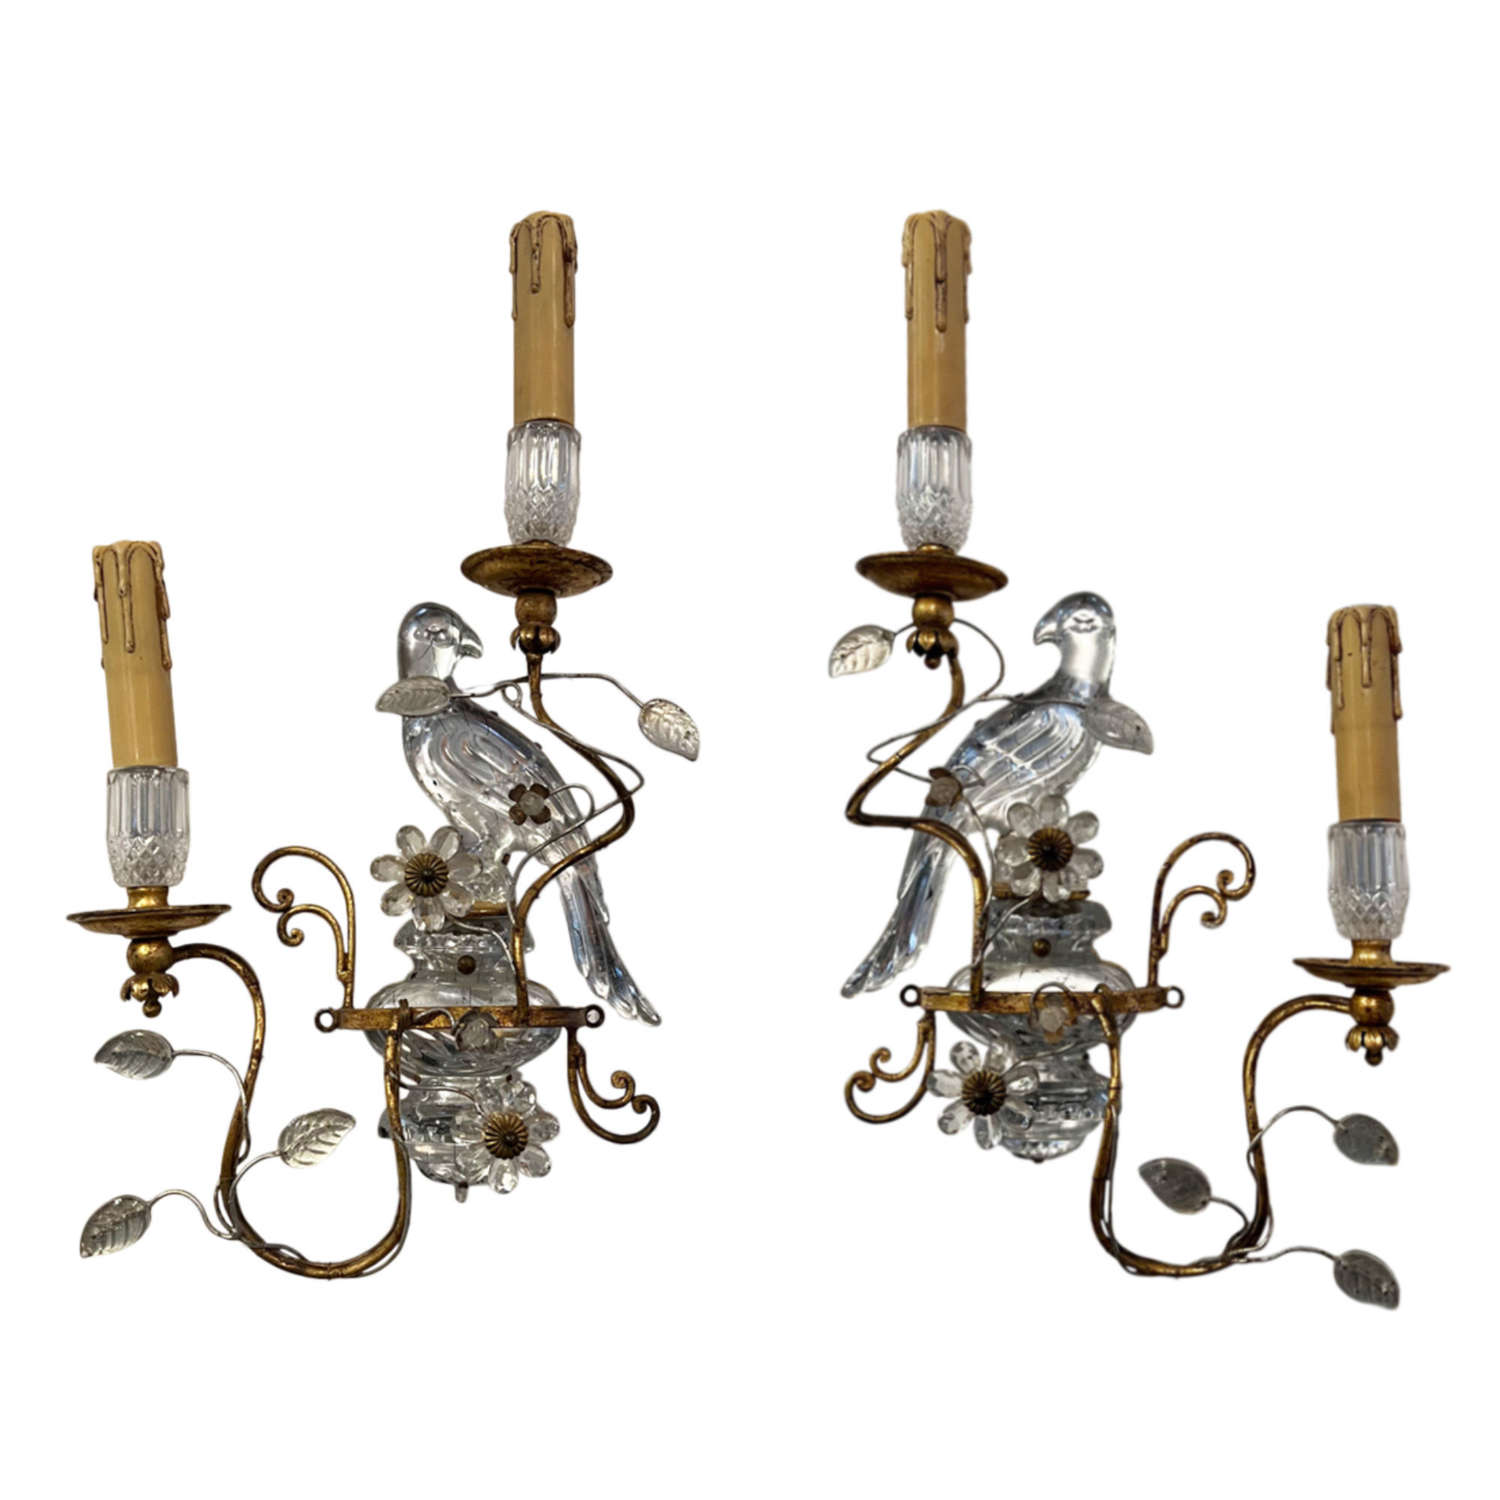 Pair of 1960s Banci Wall Sconces with Parrots and Urns